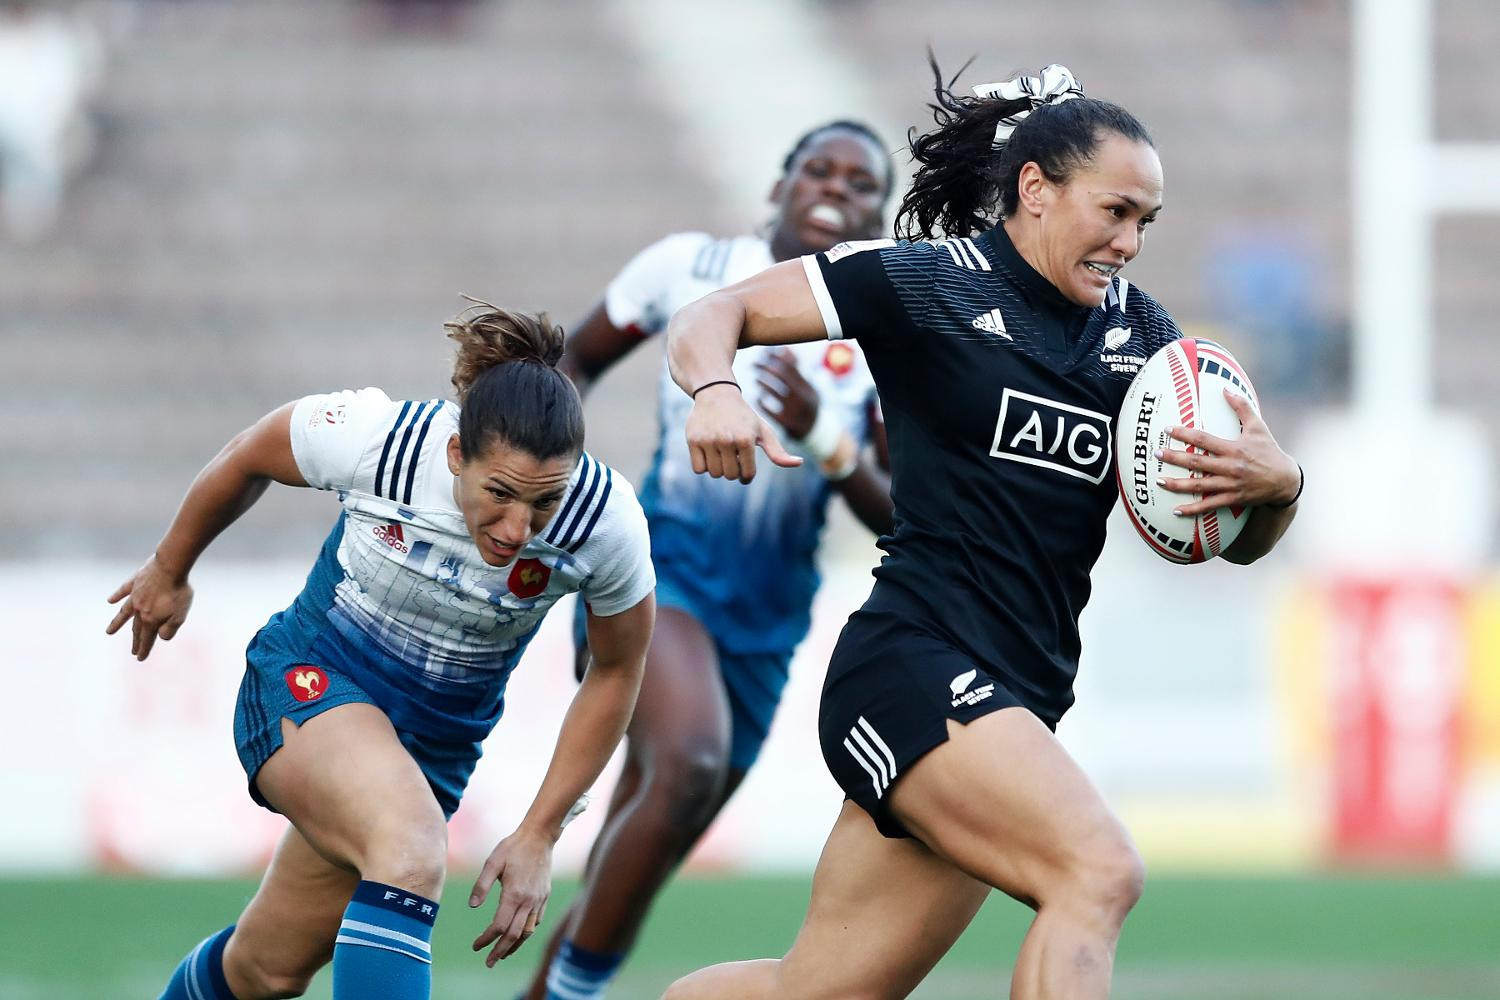 New Zealand booked their quarter-final place with ease ©World Rugby